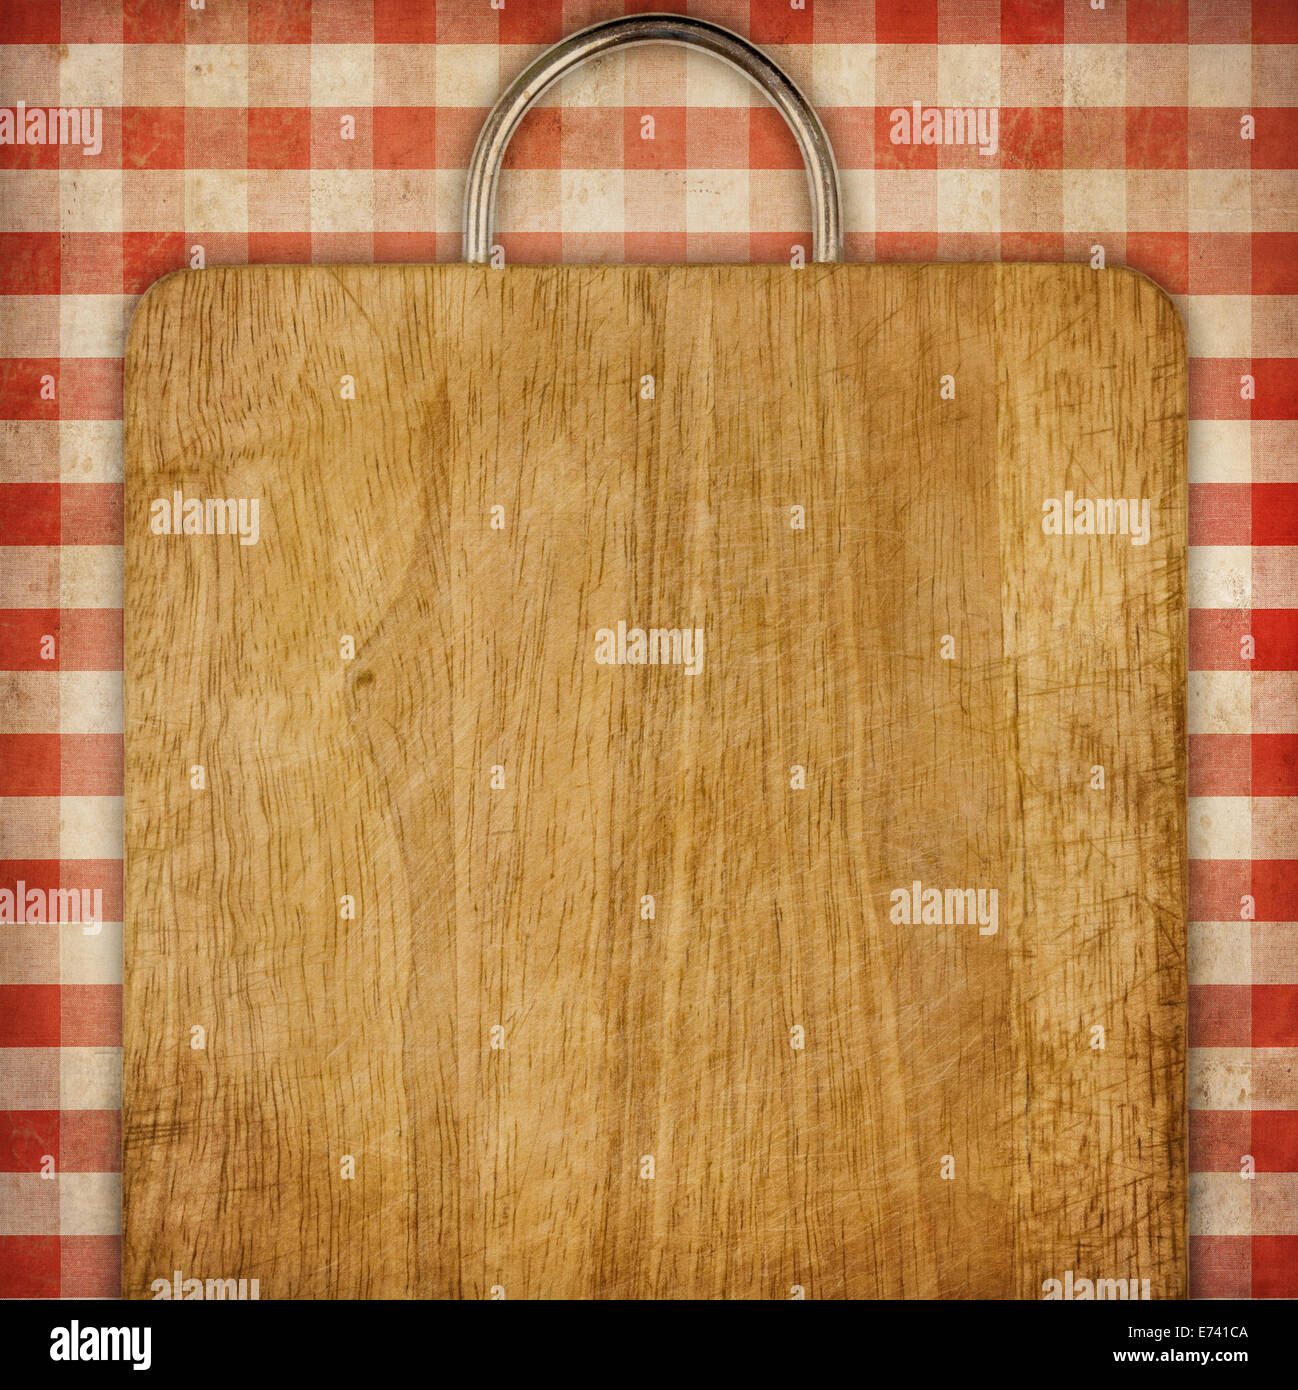 hardboard or breadboard over red checked gingham picnic tablecloth grunge background Stock Photo